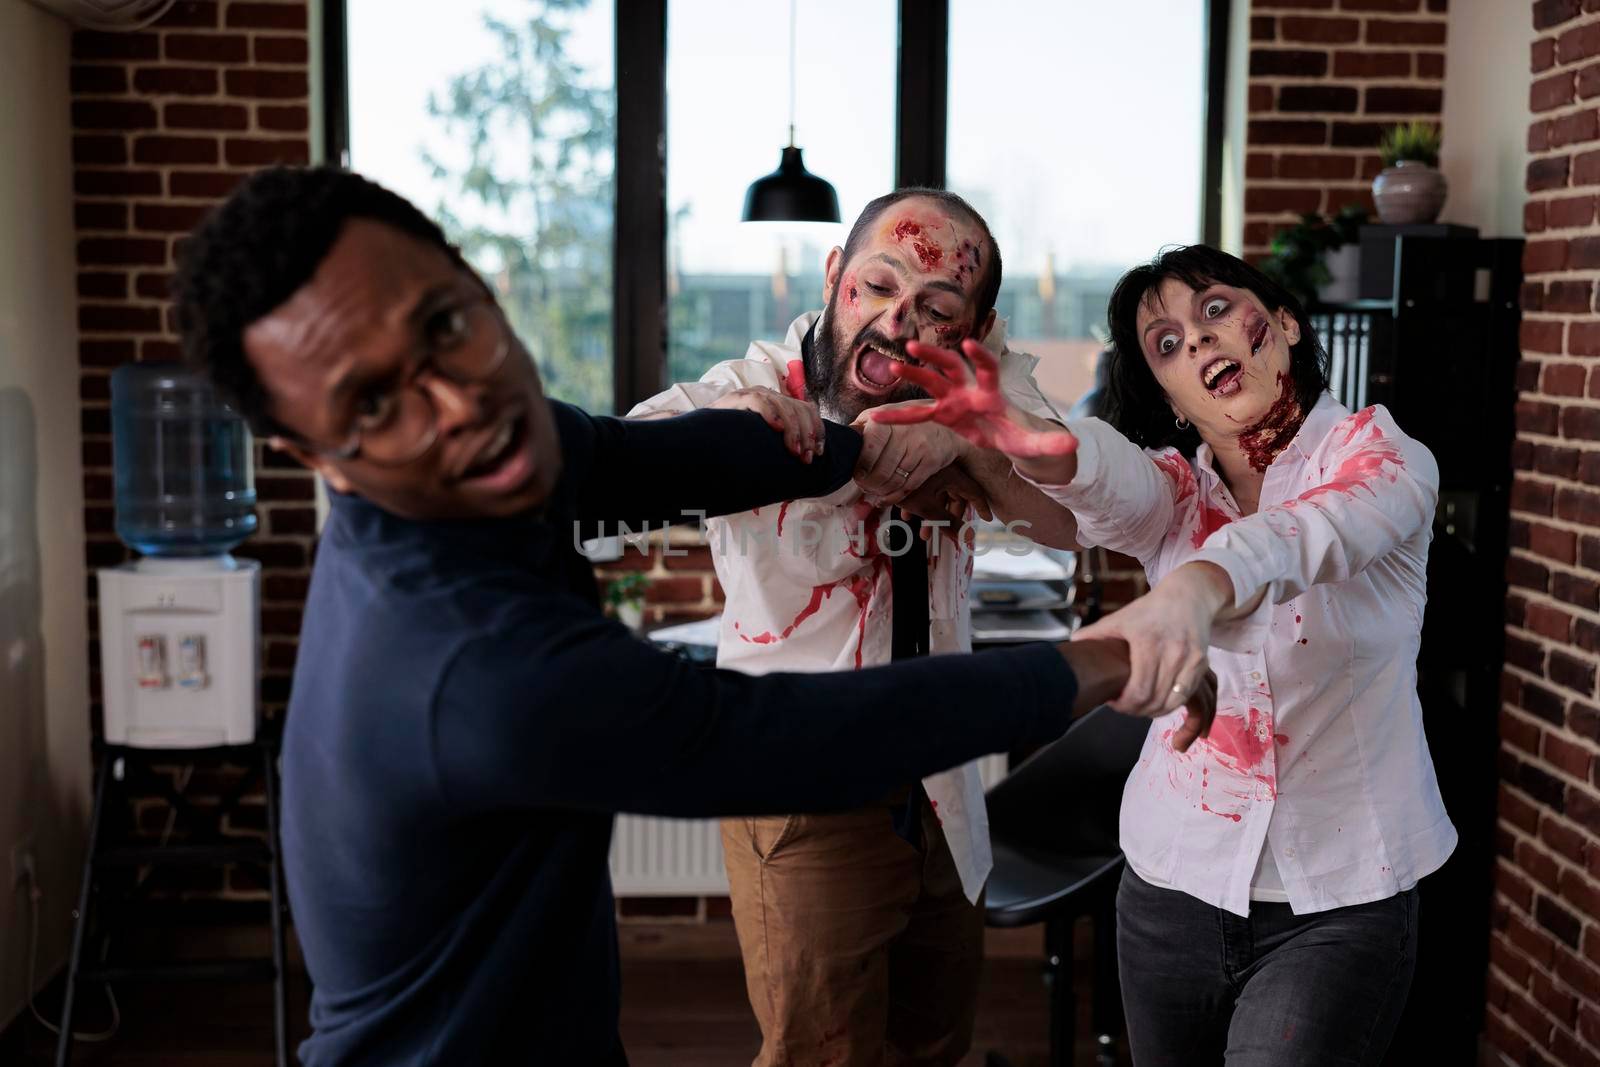 Cruel spooky zombies chasing after businessman, frightened person running from brain eating bloodthirsty monsters. Scared man being afraid of undead aggressive corpses, walking dead.